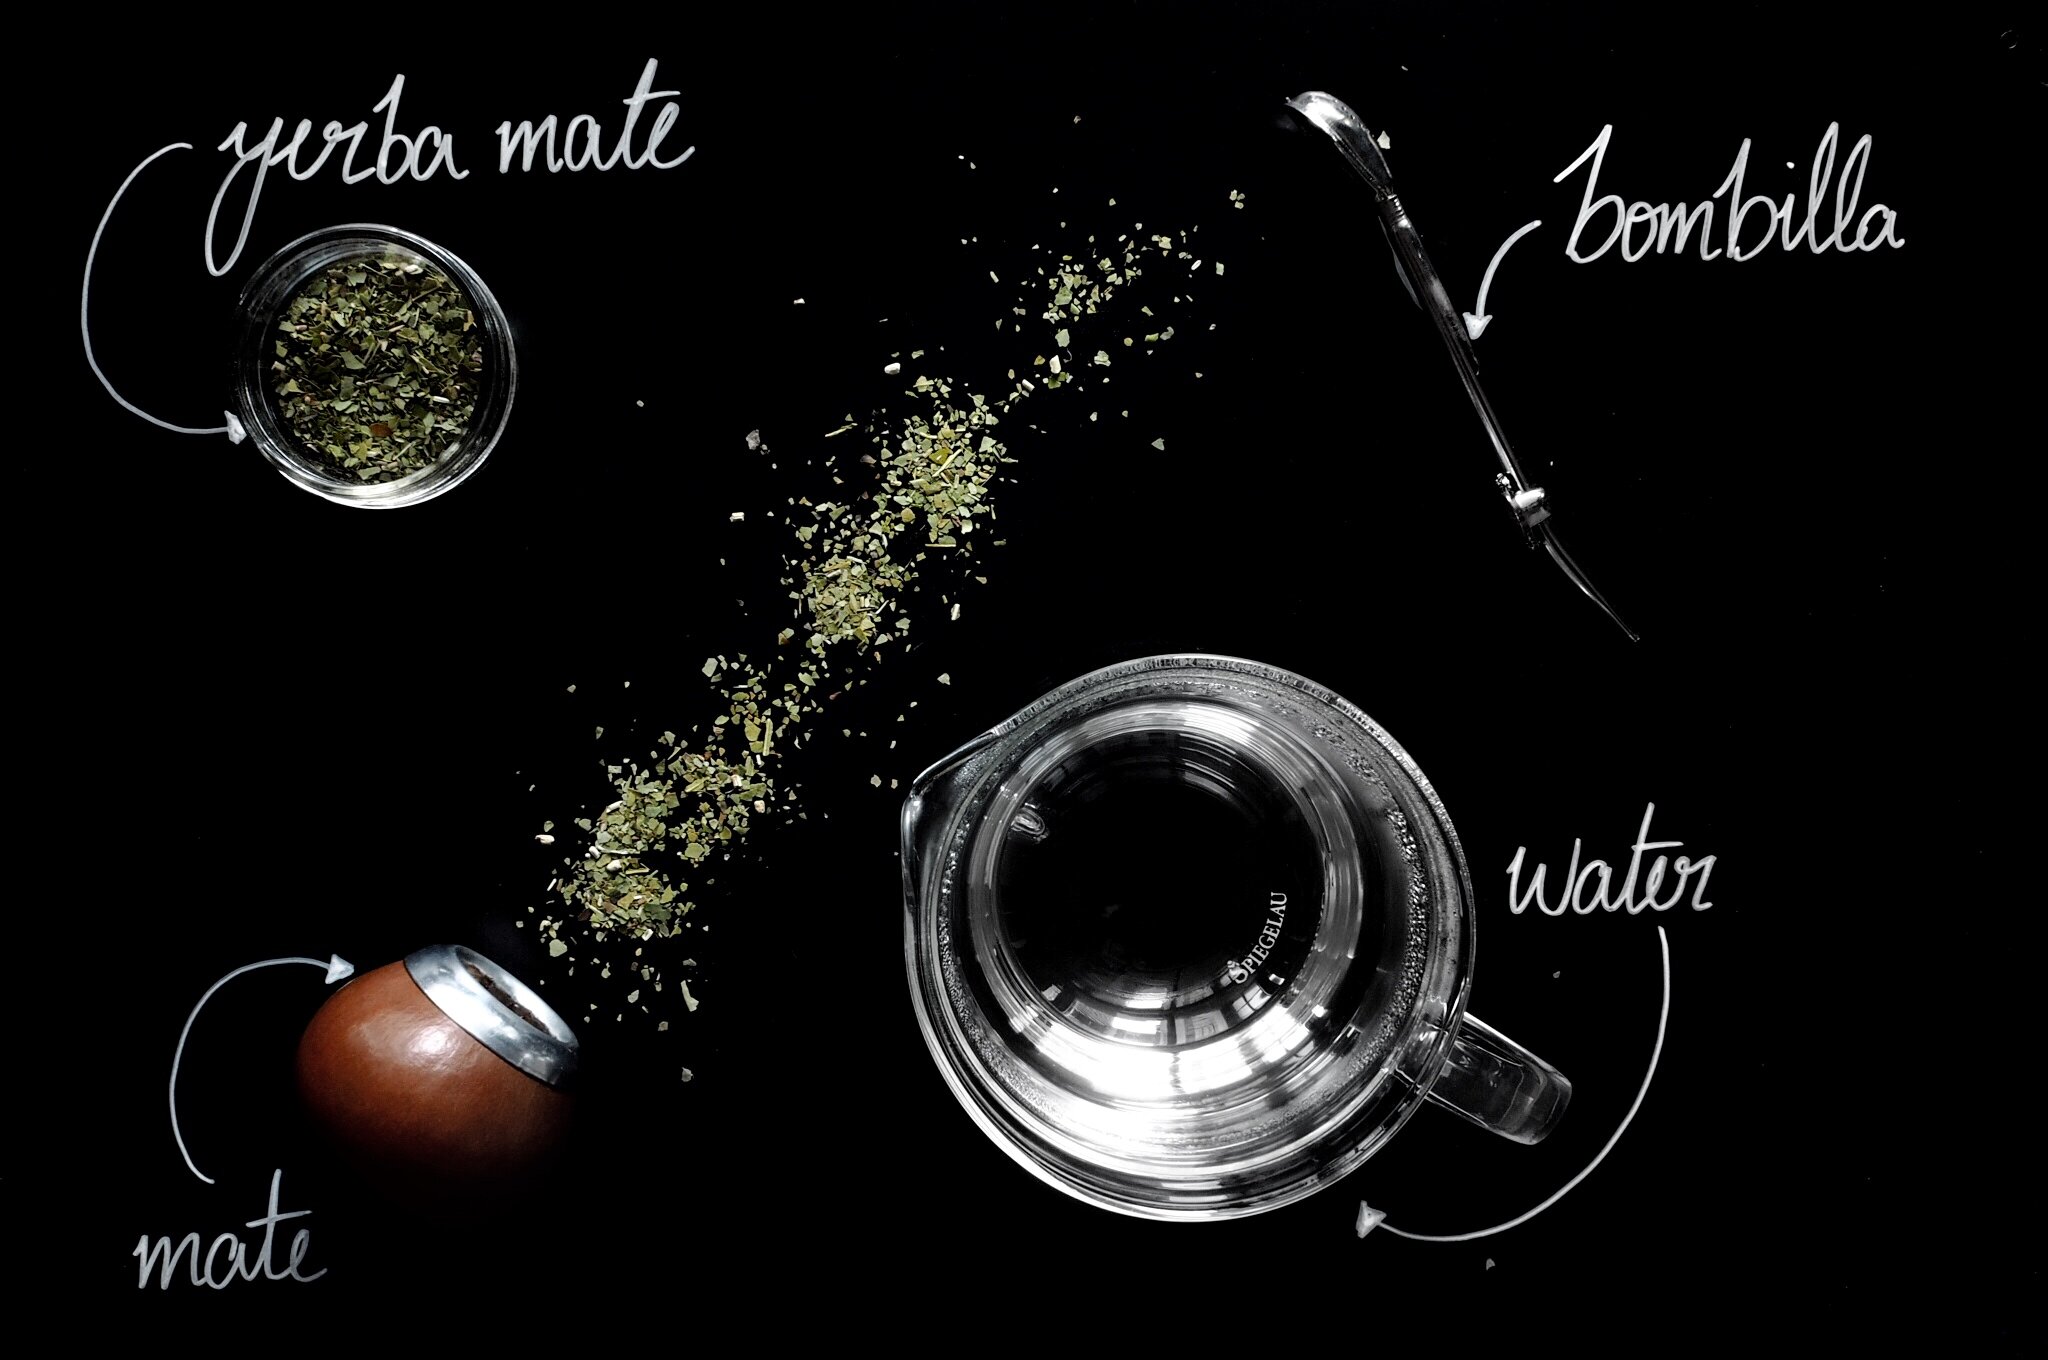 Brewing time and preparation of mate